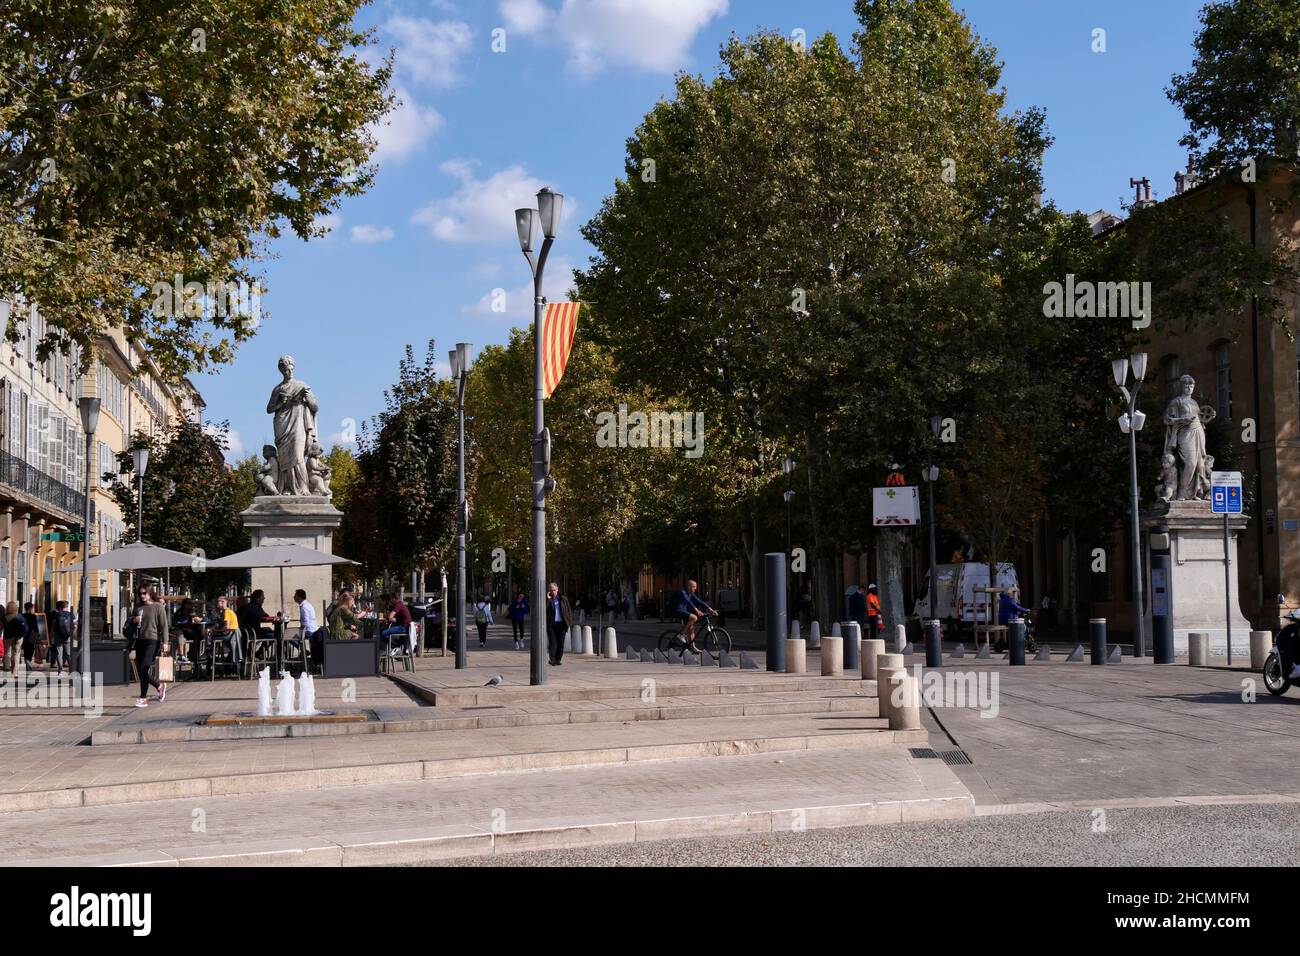 entrance to Cours Mirabeau,a historic tree lined boulevard in Aix-en-Provence, Provence-Alpes-Côte d'Azur,France Stock Photo